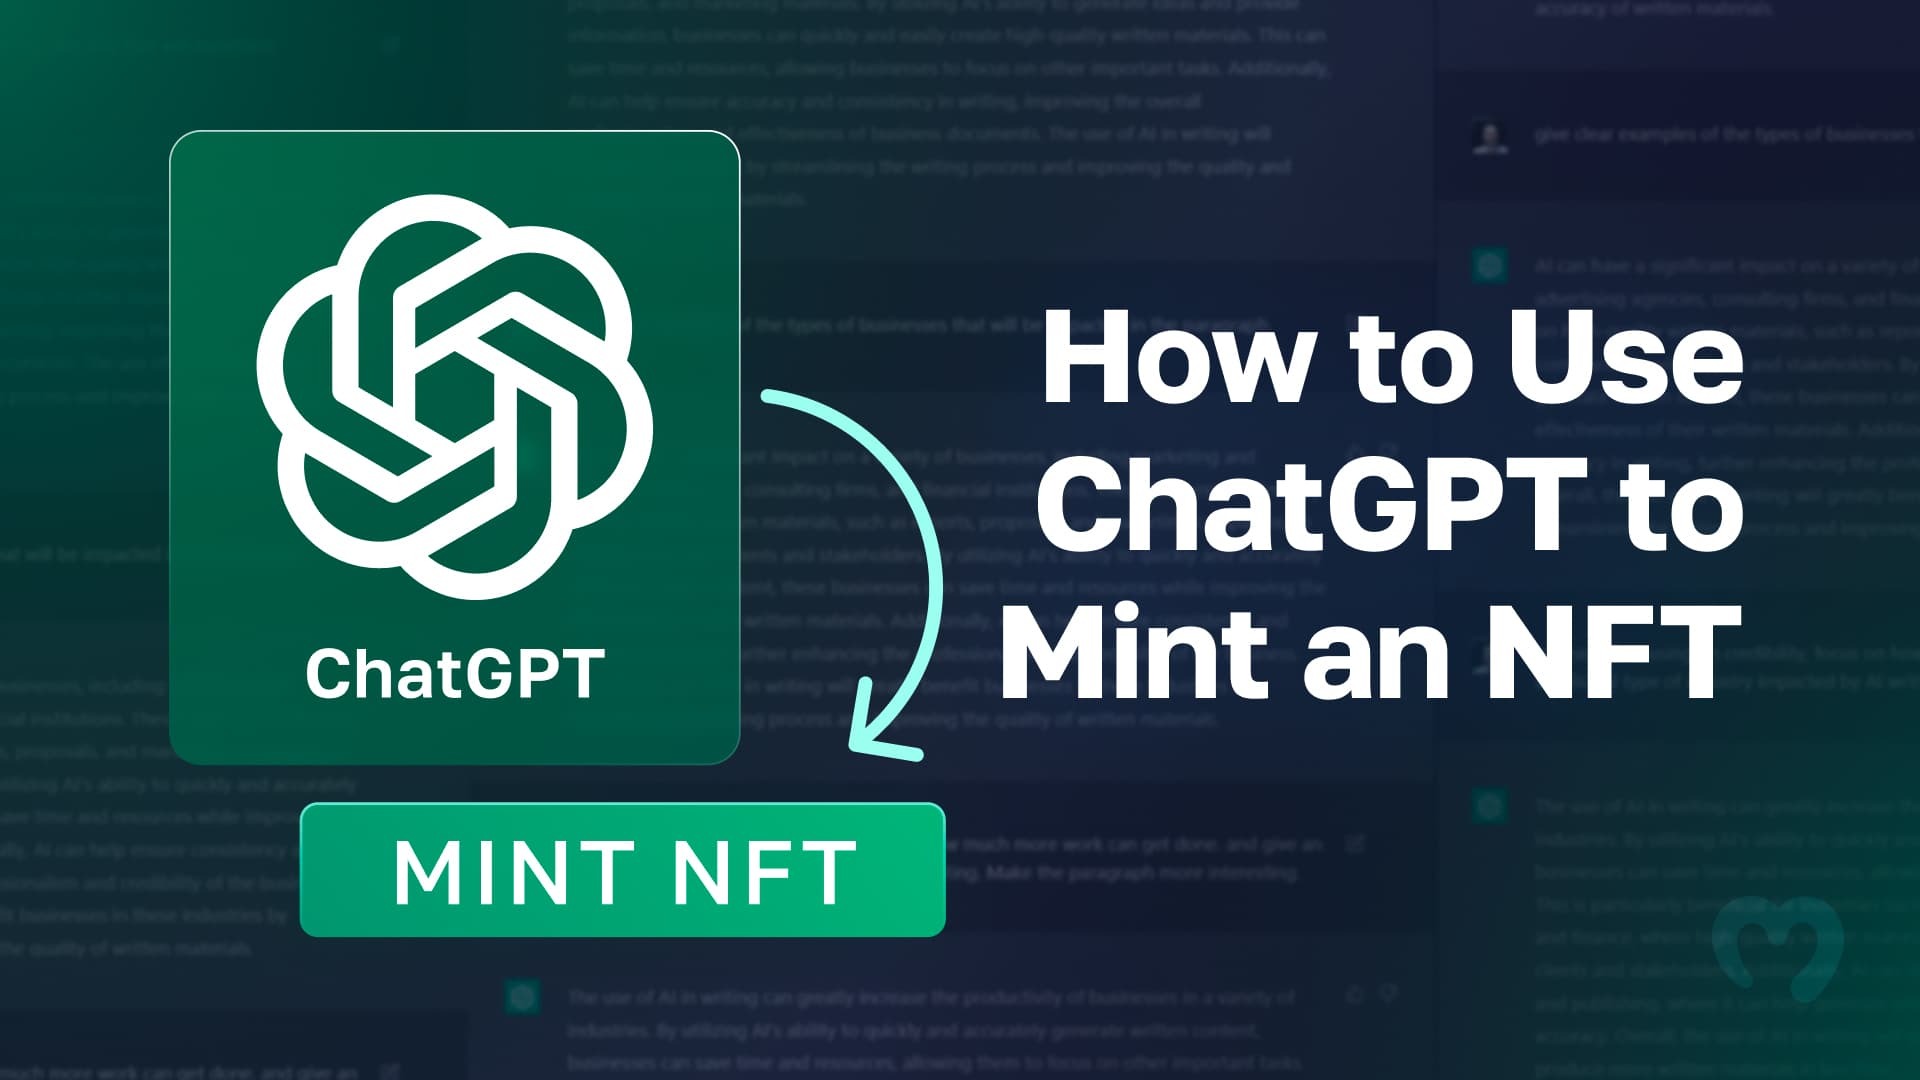 How to Use ChatGPT to Mint an NFT